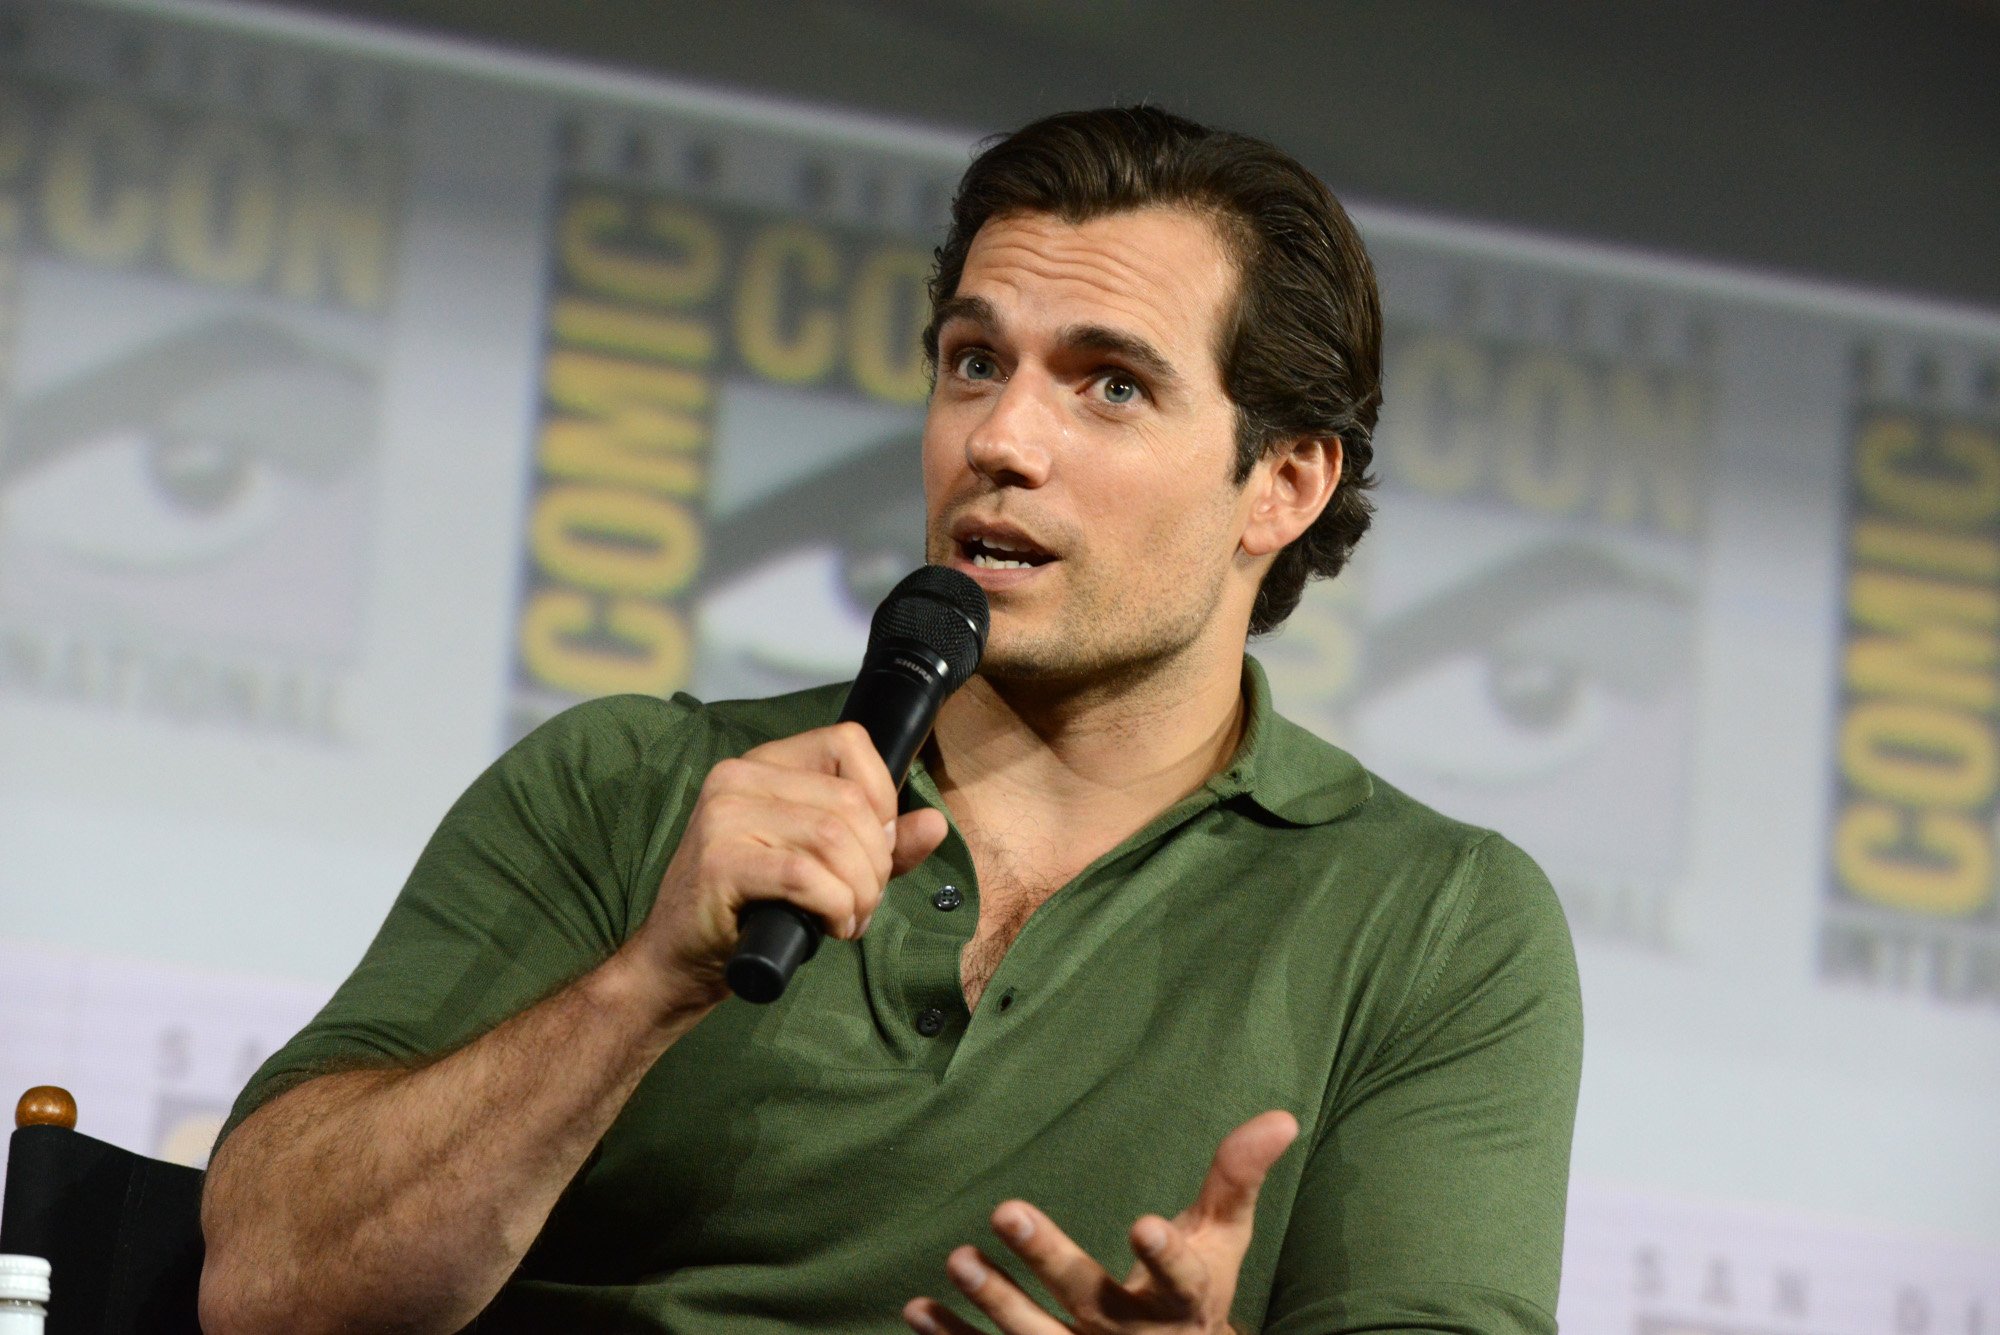 Superman star Henry Cavill wears a green collared shirt and speaks into a microphone at San Diego Comic-Con